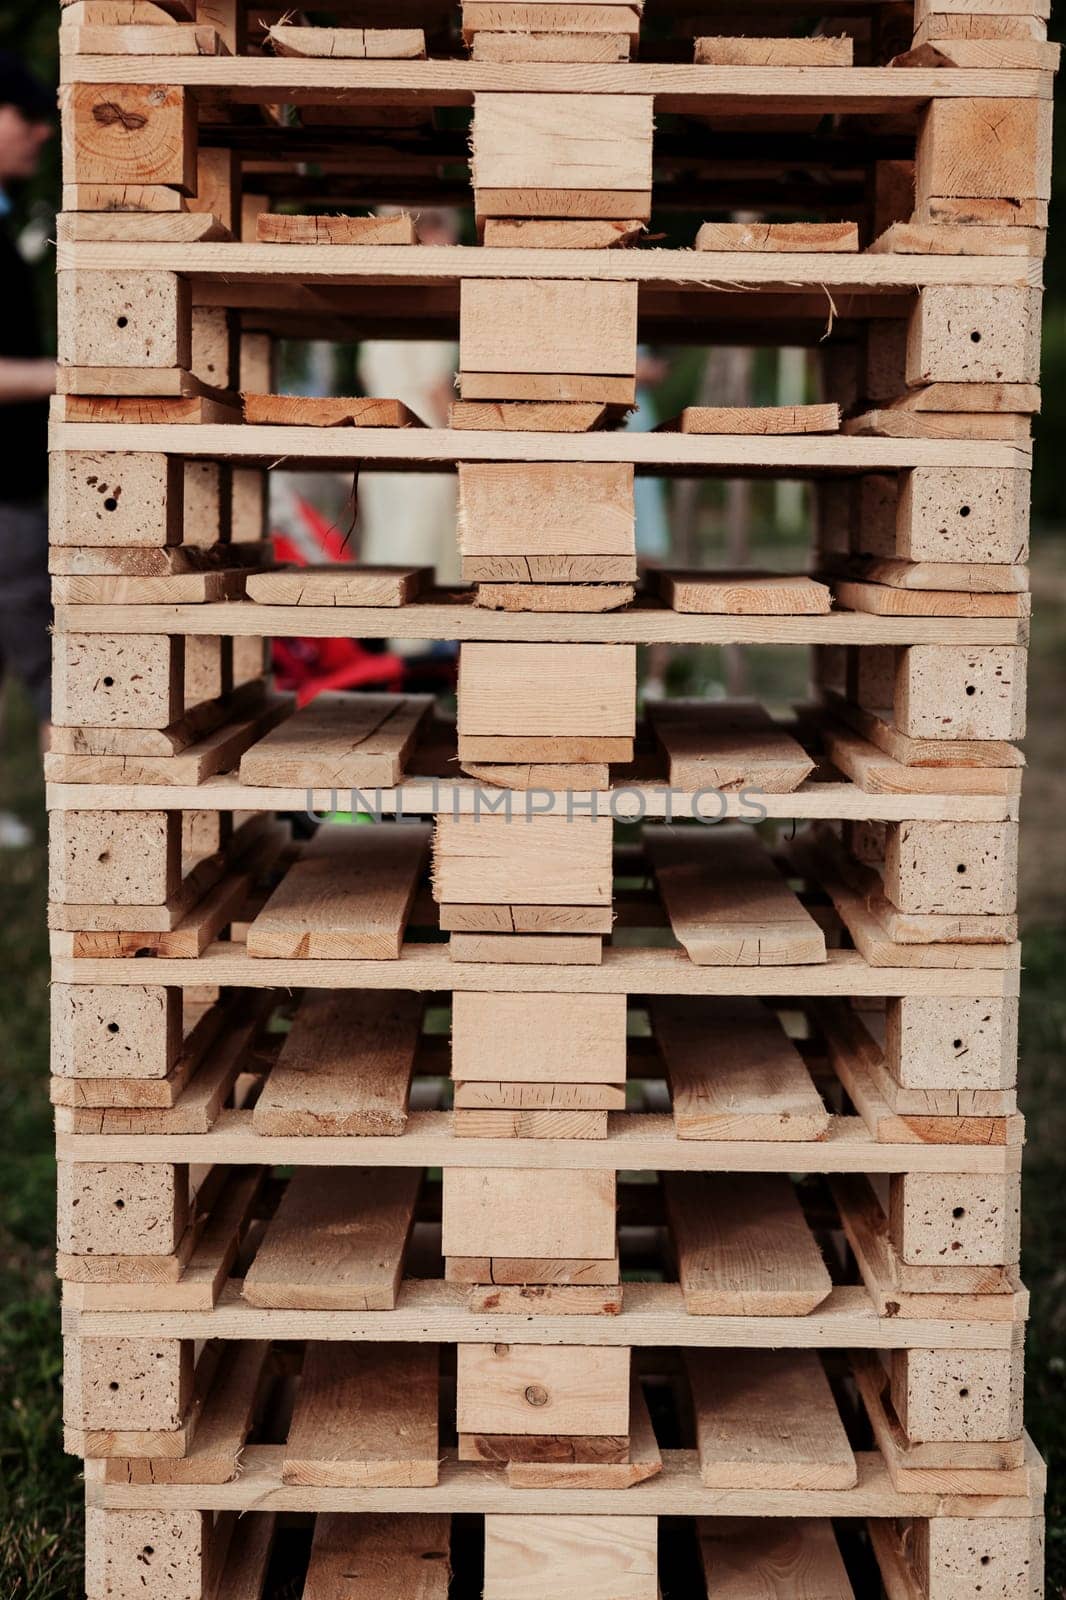 stacks of wooden pallets by Ladouski